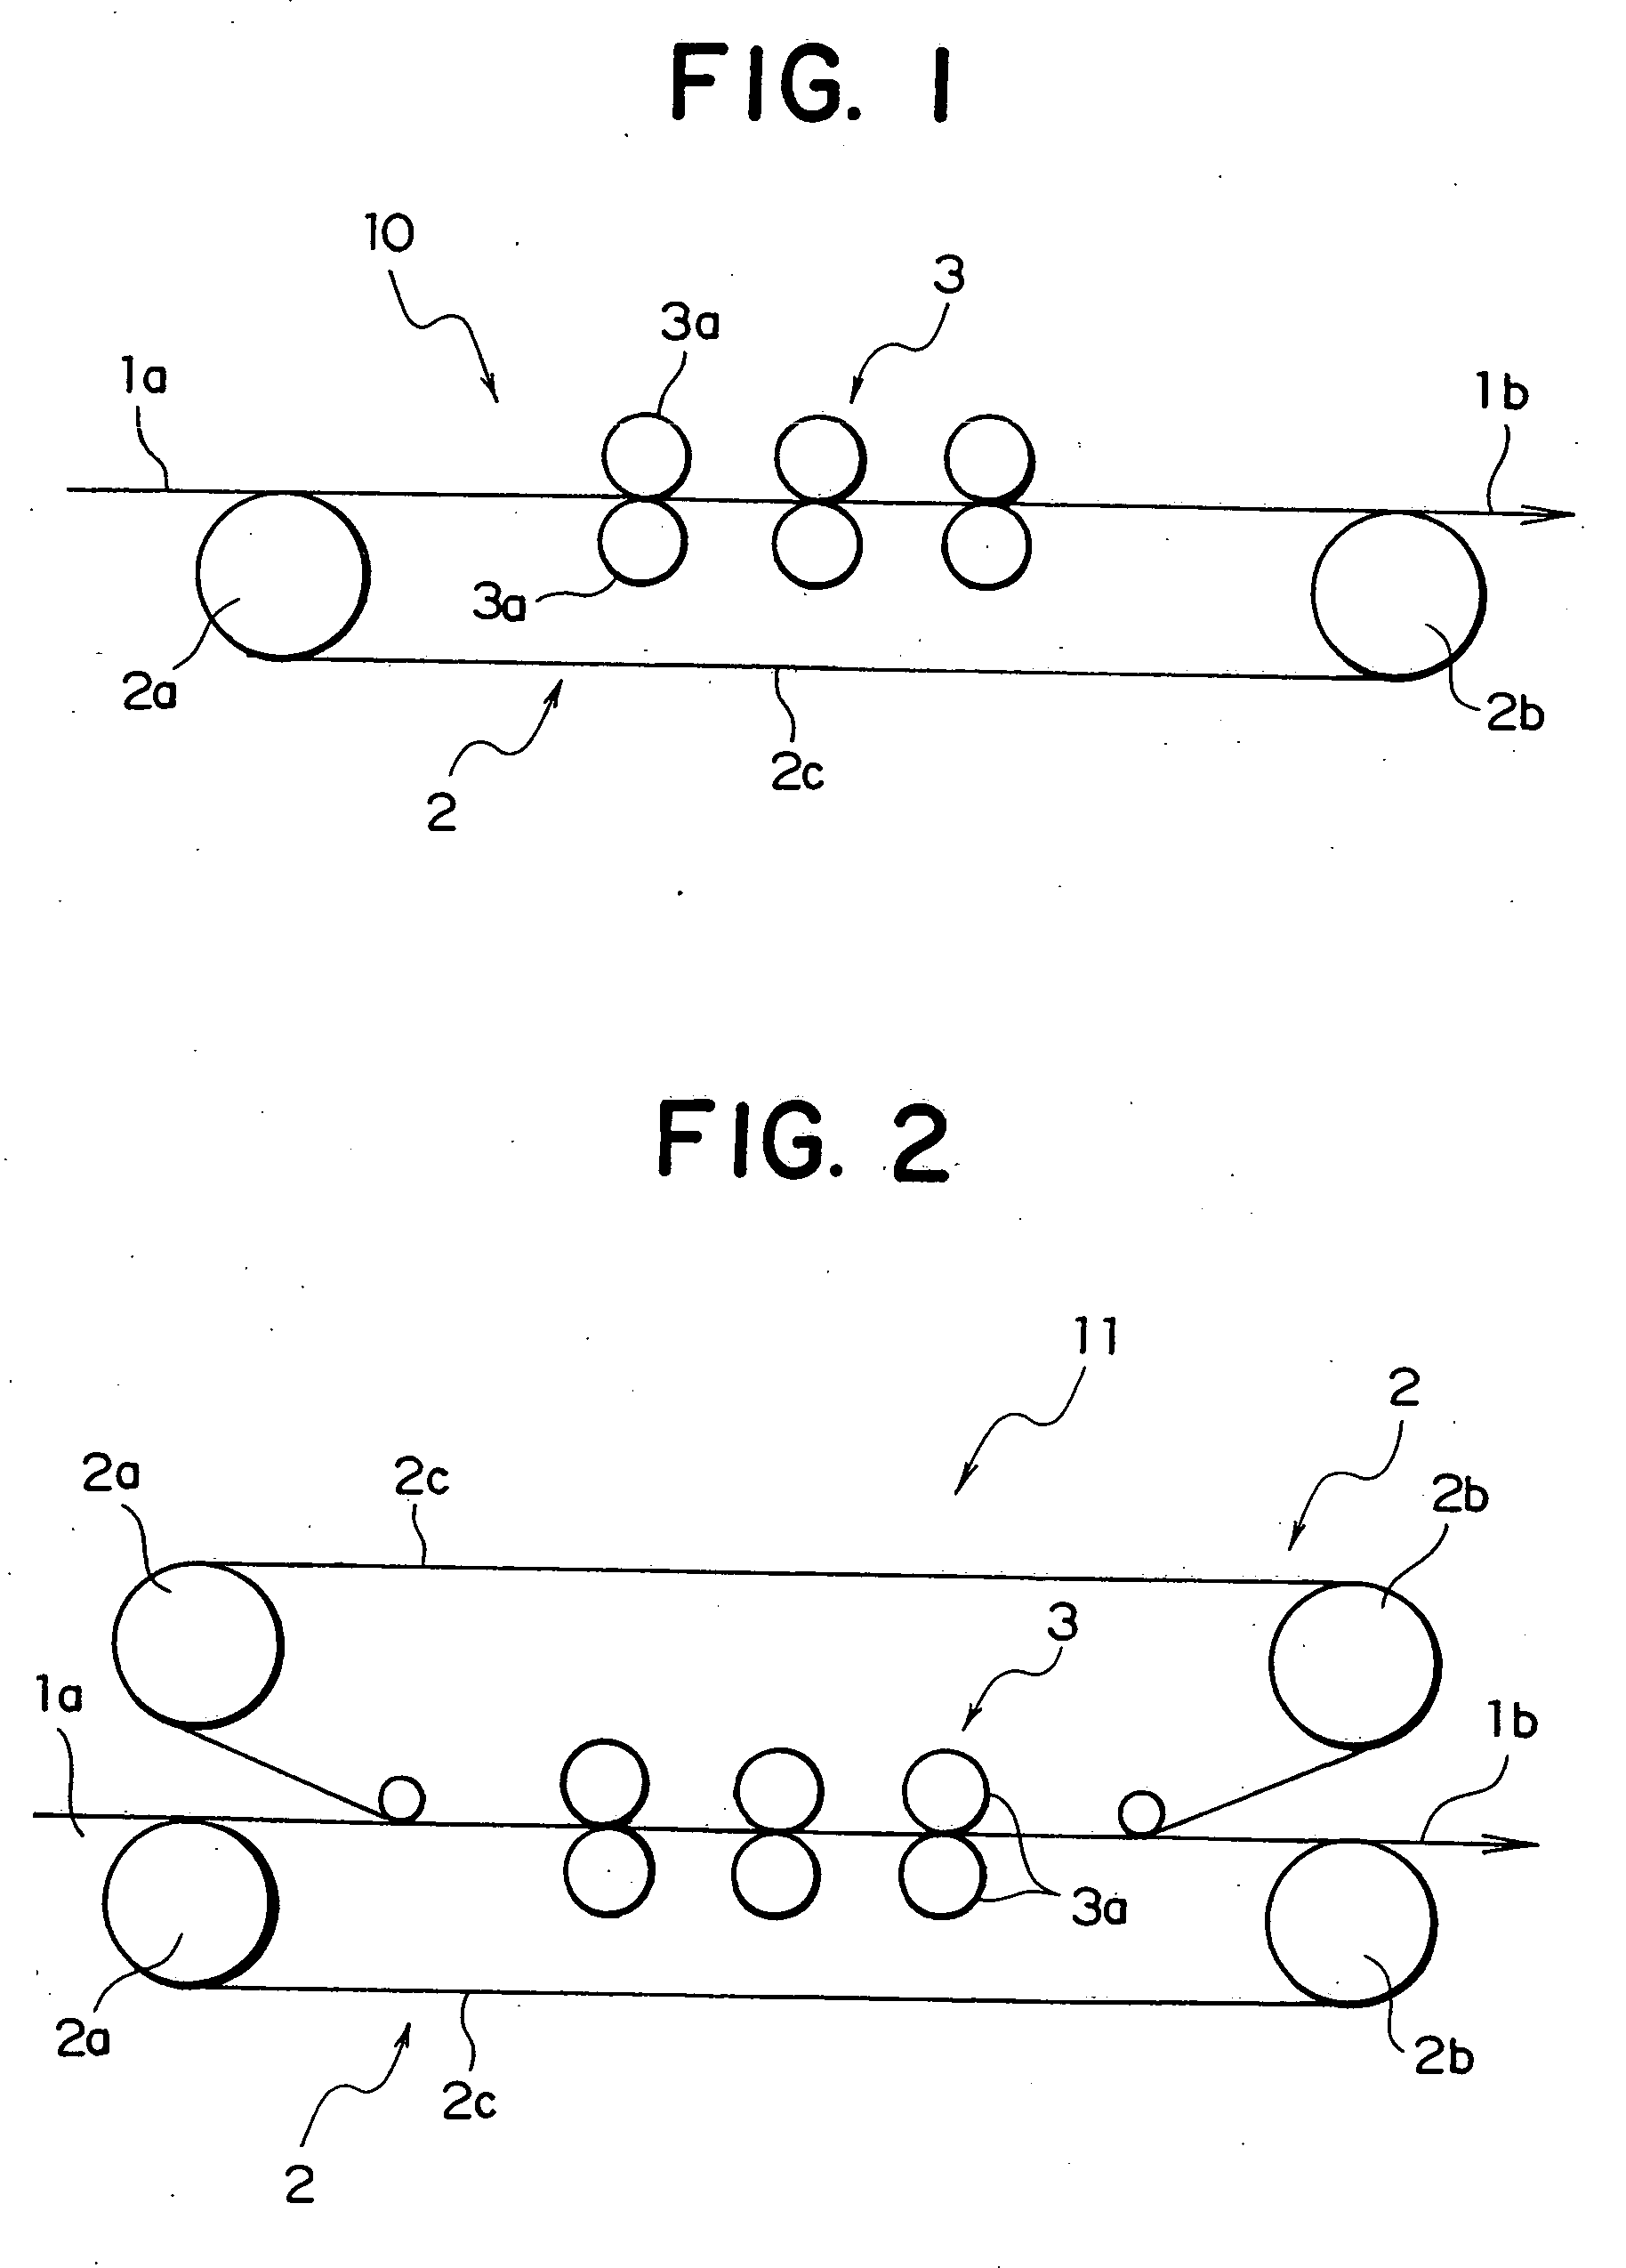 Apparatus and method for manufacturing resin-impregnated cured sheet, and apparatus and method for manufacturing carbonaceous material sheet